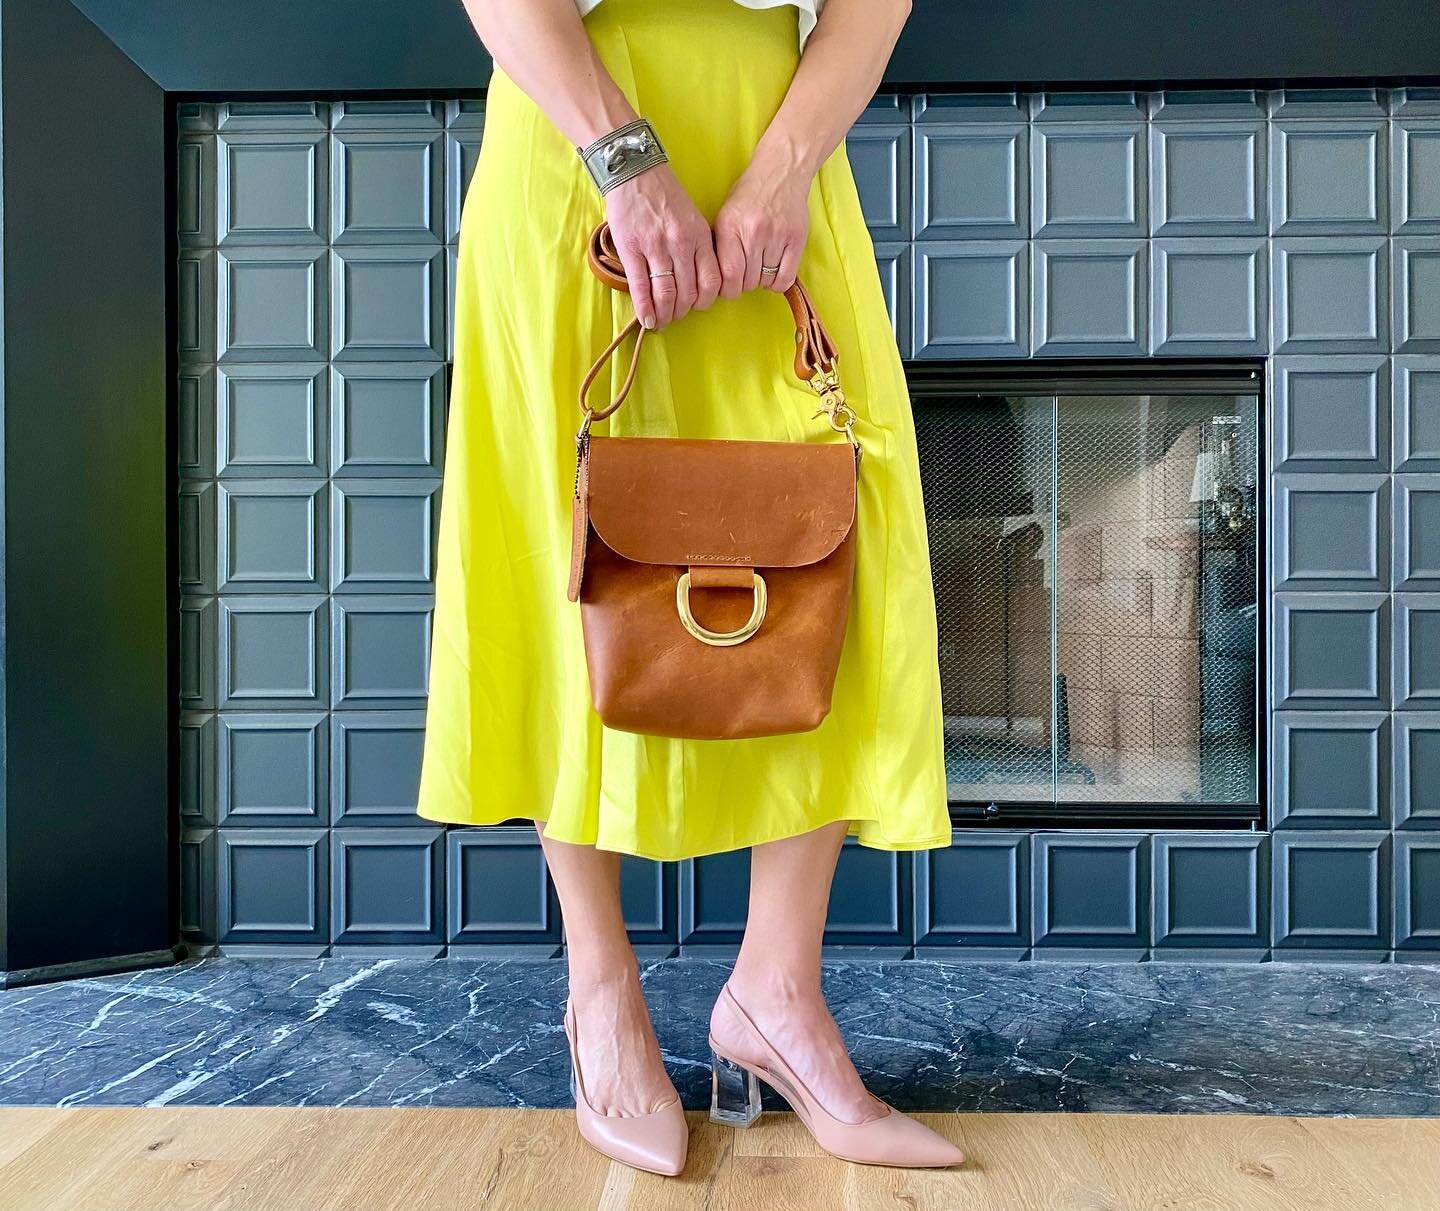 [ Mother&rsquo;s Day Gifts ]

It&rsquo;s always nice to be able to point the family in the right direction for gift ideas! Our handmade in Montana leather bags are truly luxurious and one of a kind.

Click link in bio to shop:

https://www.frankandco